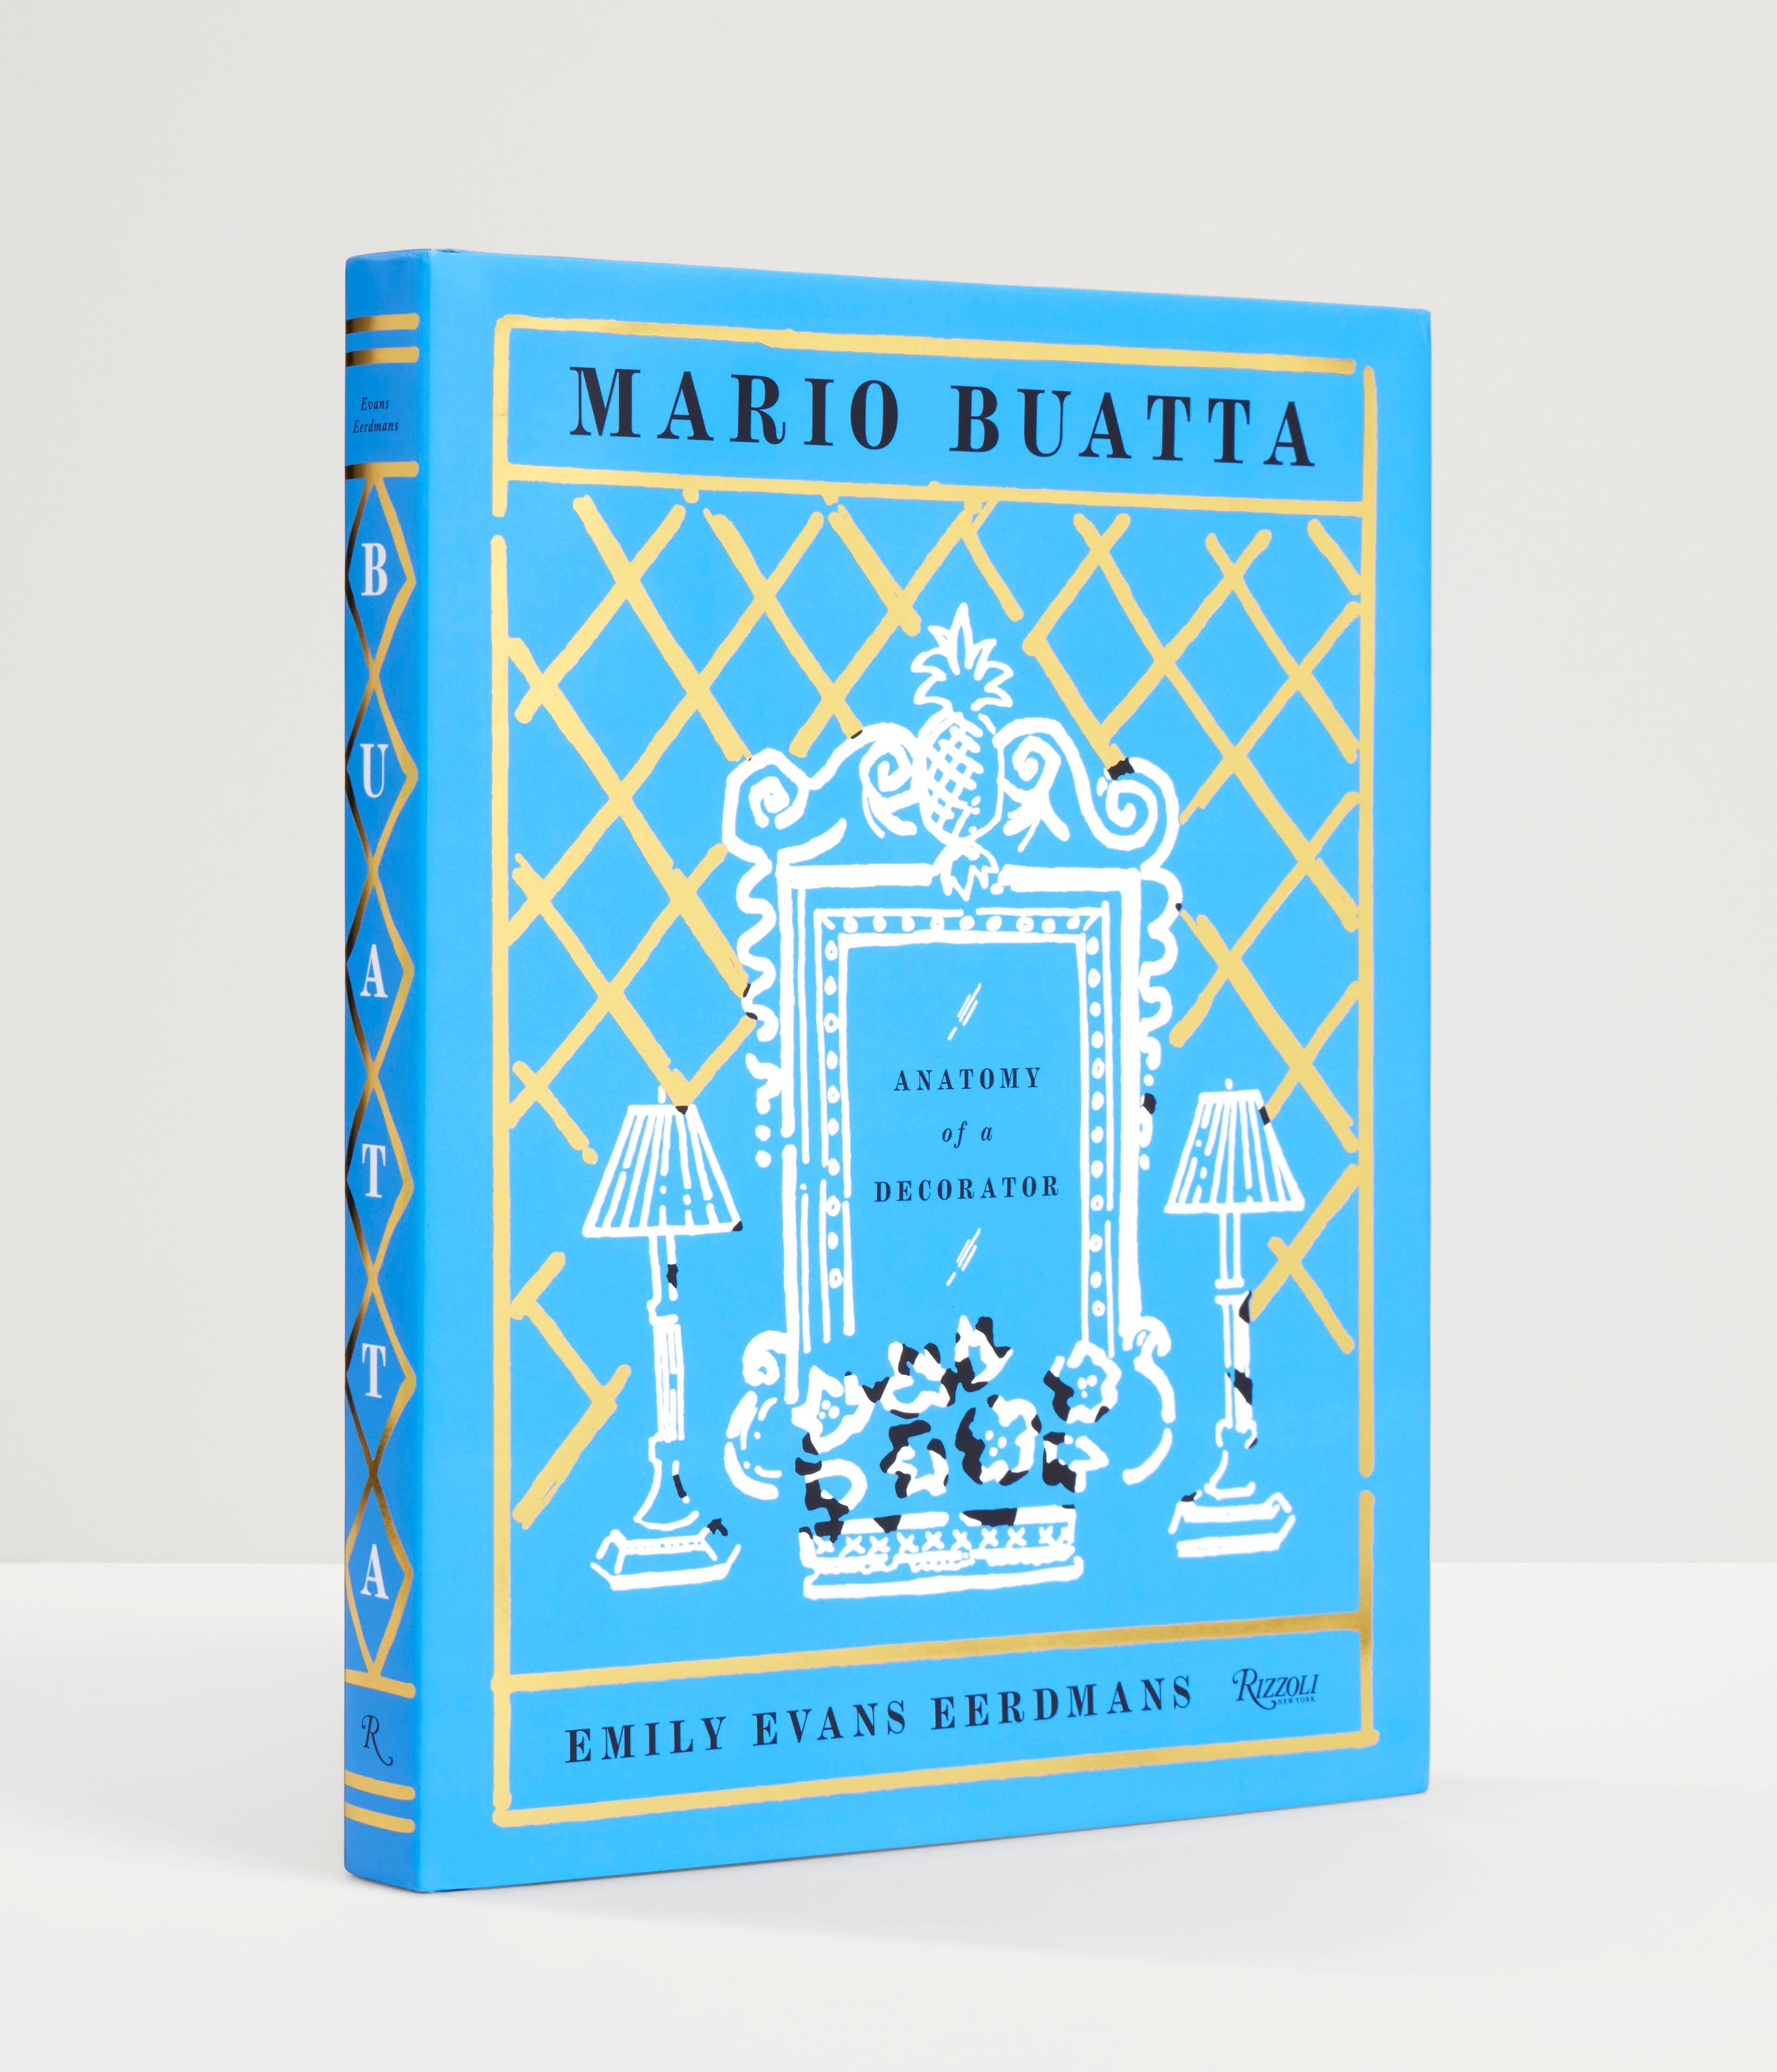 Mario Buatta: Anatomy of a Decorator
Author Emily Evans Eerdmans, Foreword by Patricia Altschul

The first authoritative assessment of Mario Buatta by a protégée of the decorator. Never-before-seen archival material is culled to present the design